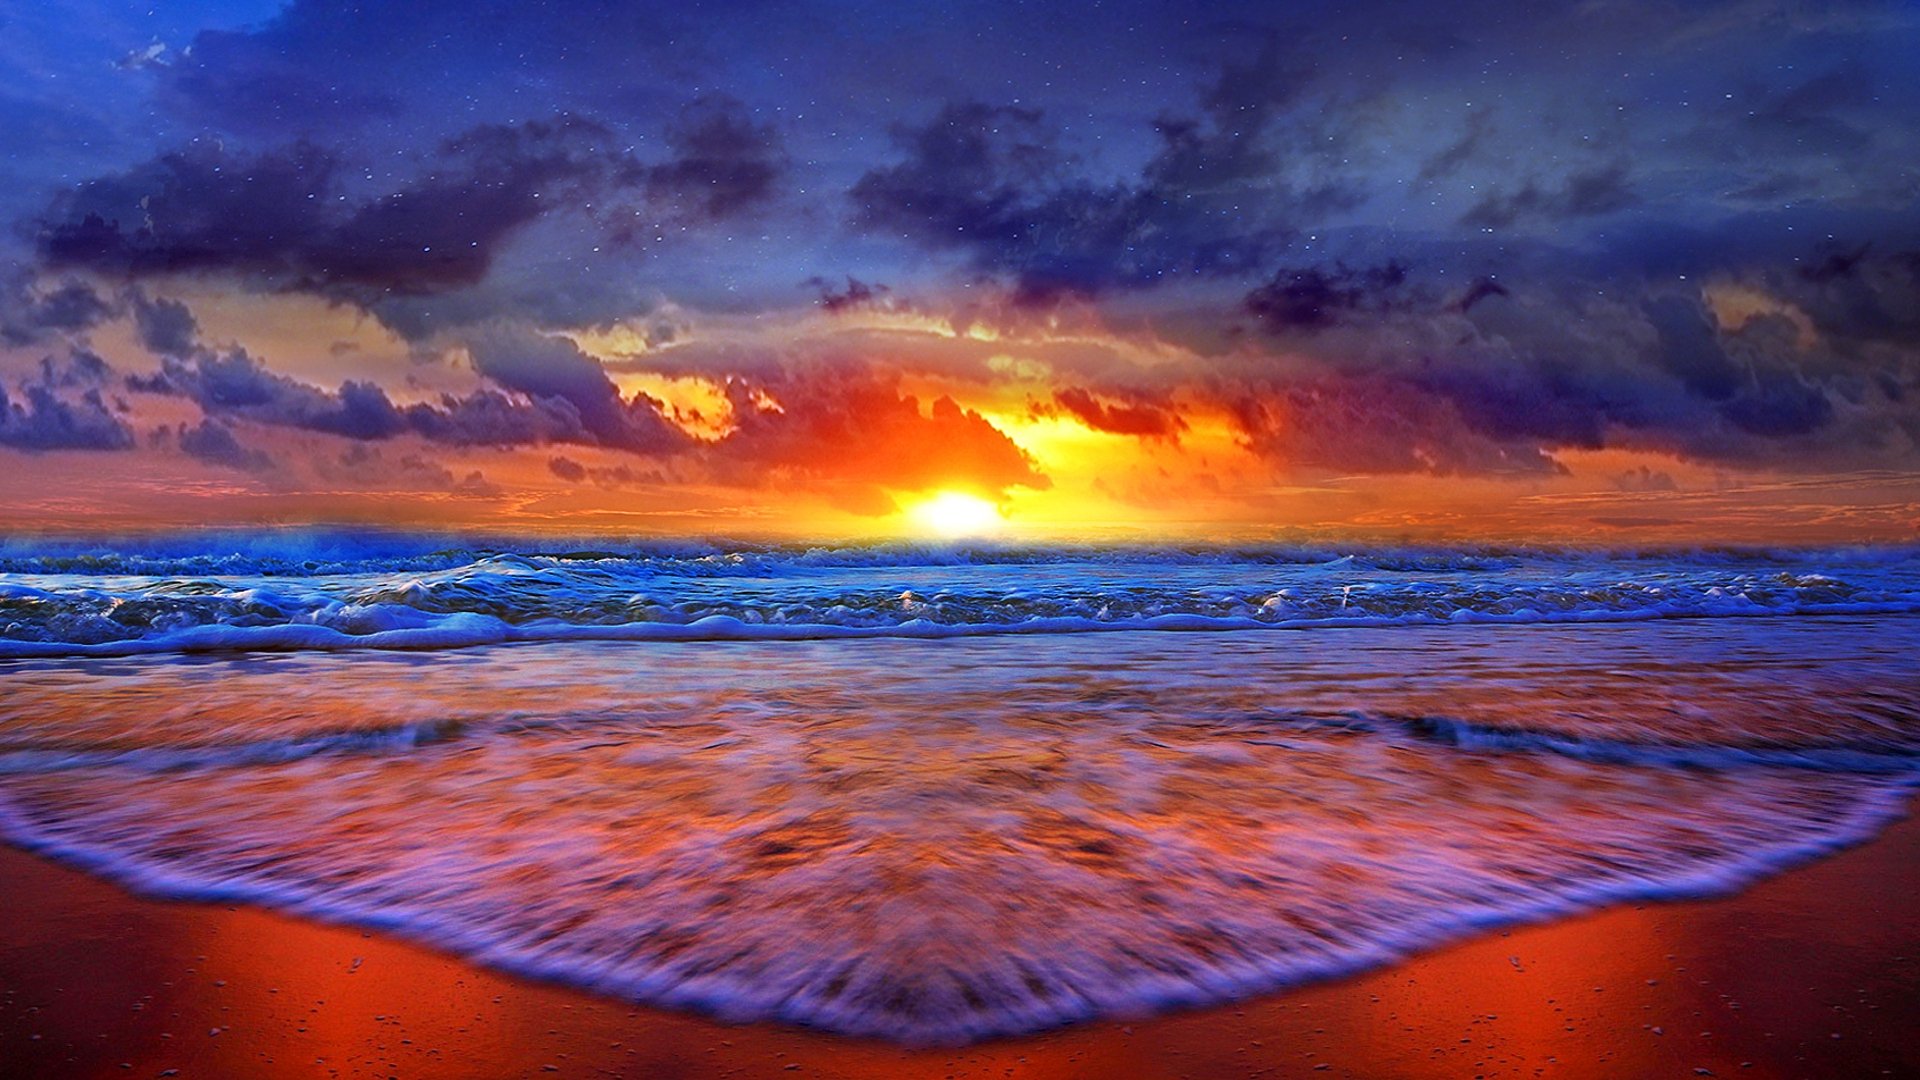 Beach Sunset Pictures Desktop Images amp Pictures   Becuo